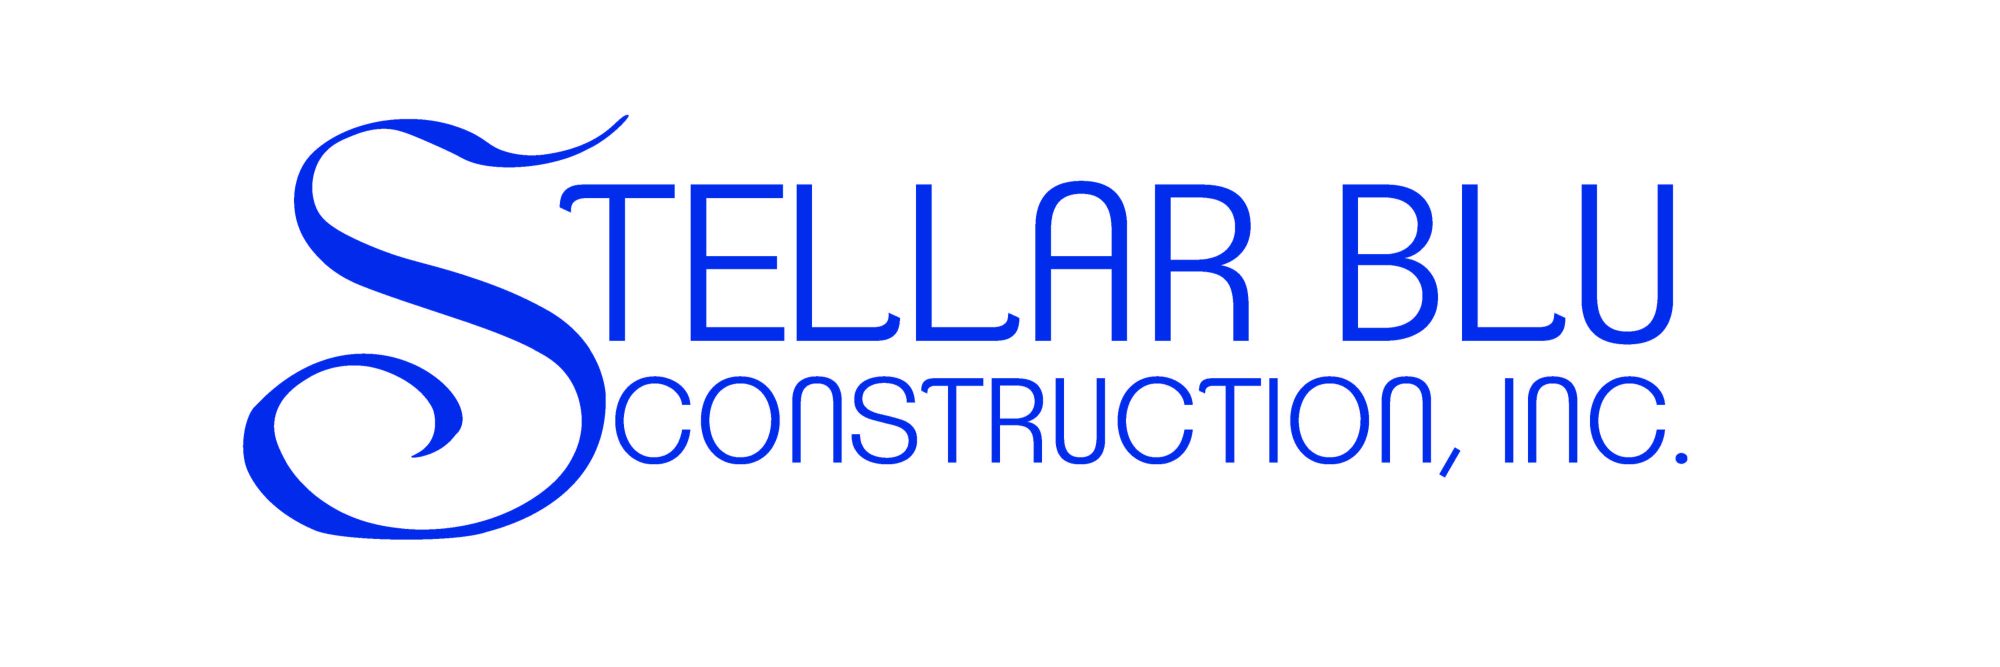 The logo for Stellar Blu Construction. The name of the incorporation is in blue cursive letters on a white background.